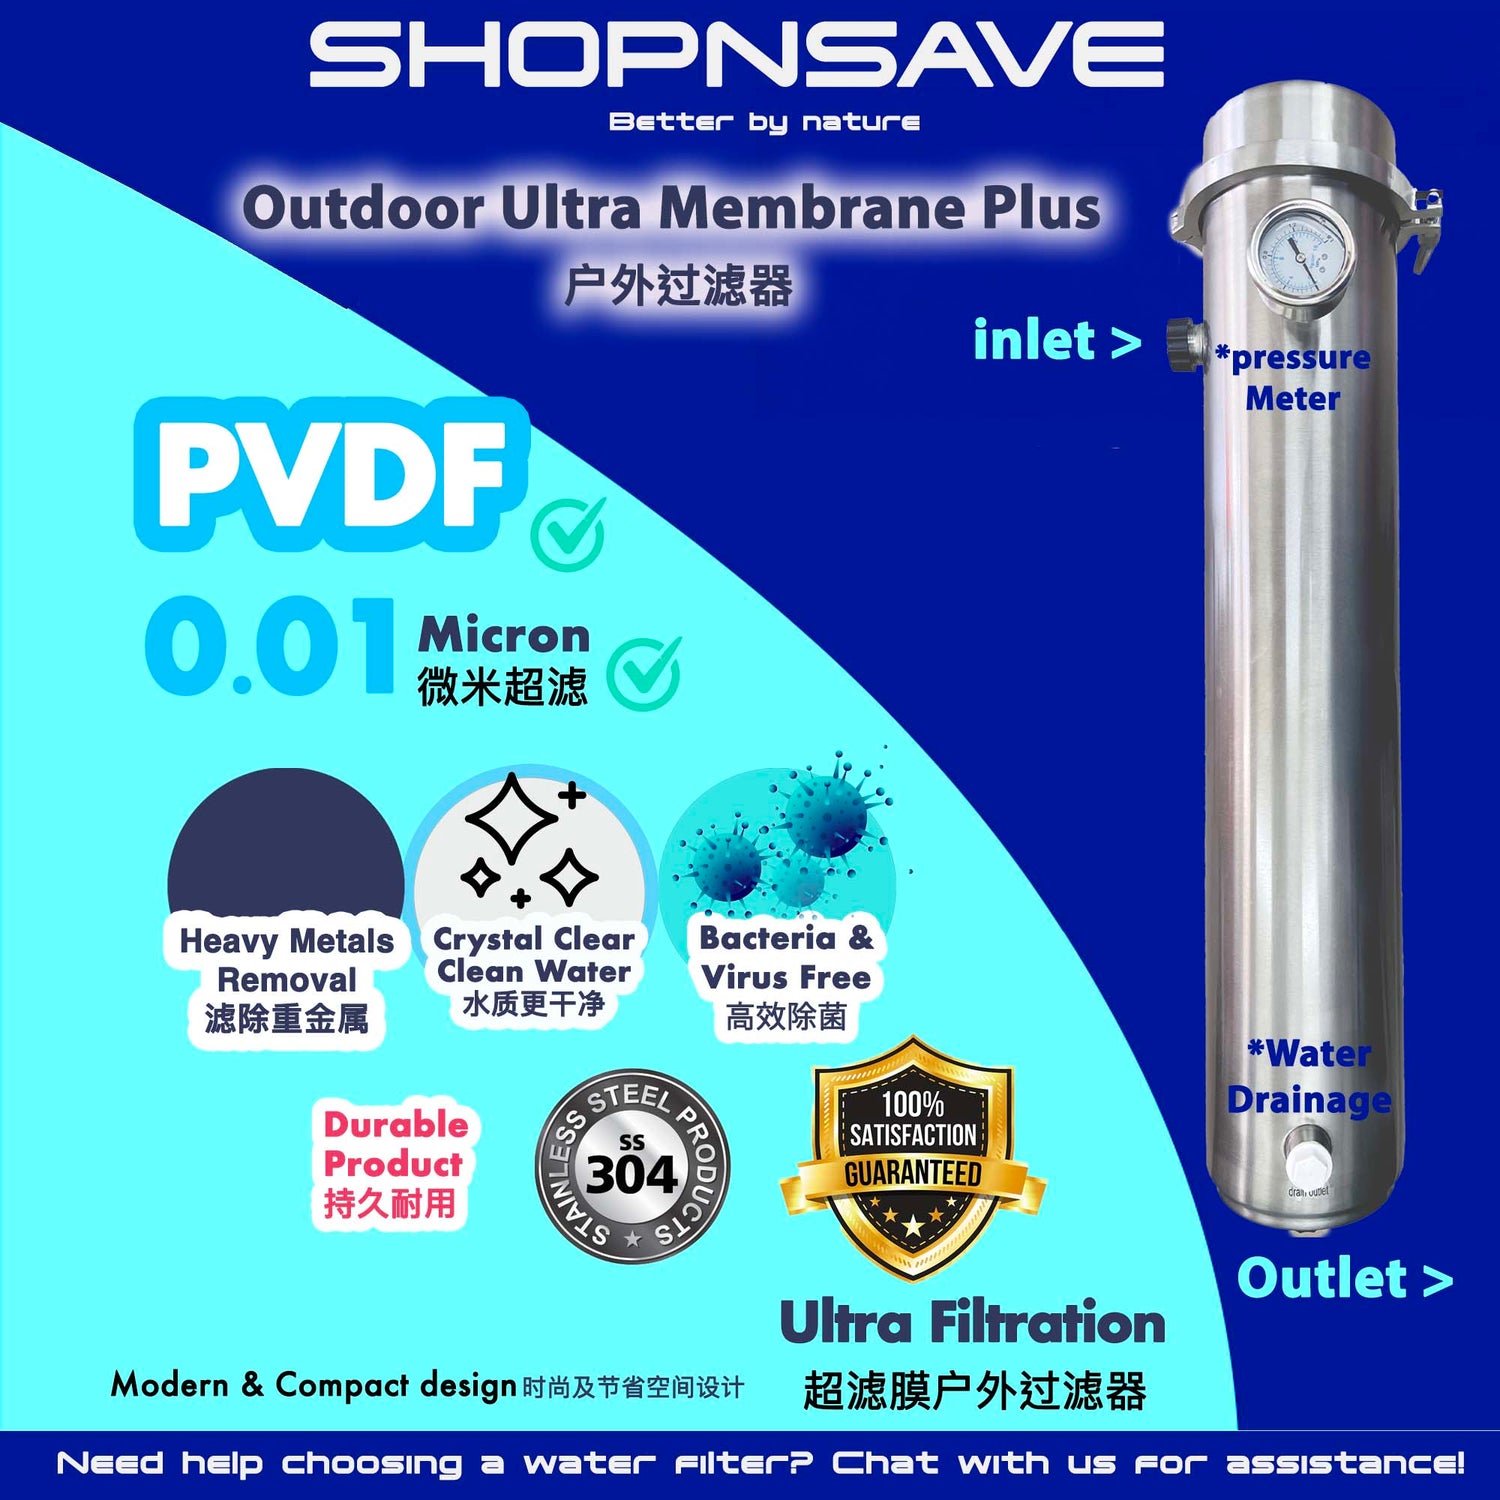 (FREE Installation!) Pureal Water Purifier + Advanced Wholehouse Ultra Membrane PLUS Filtration System - Featuring PVDF Technology with 0.01 Micron Superior Clarity Rating